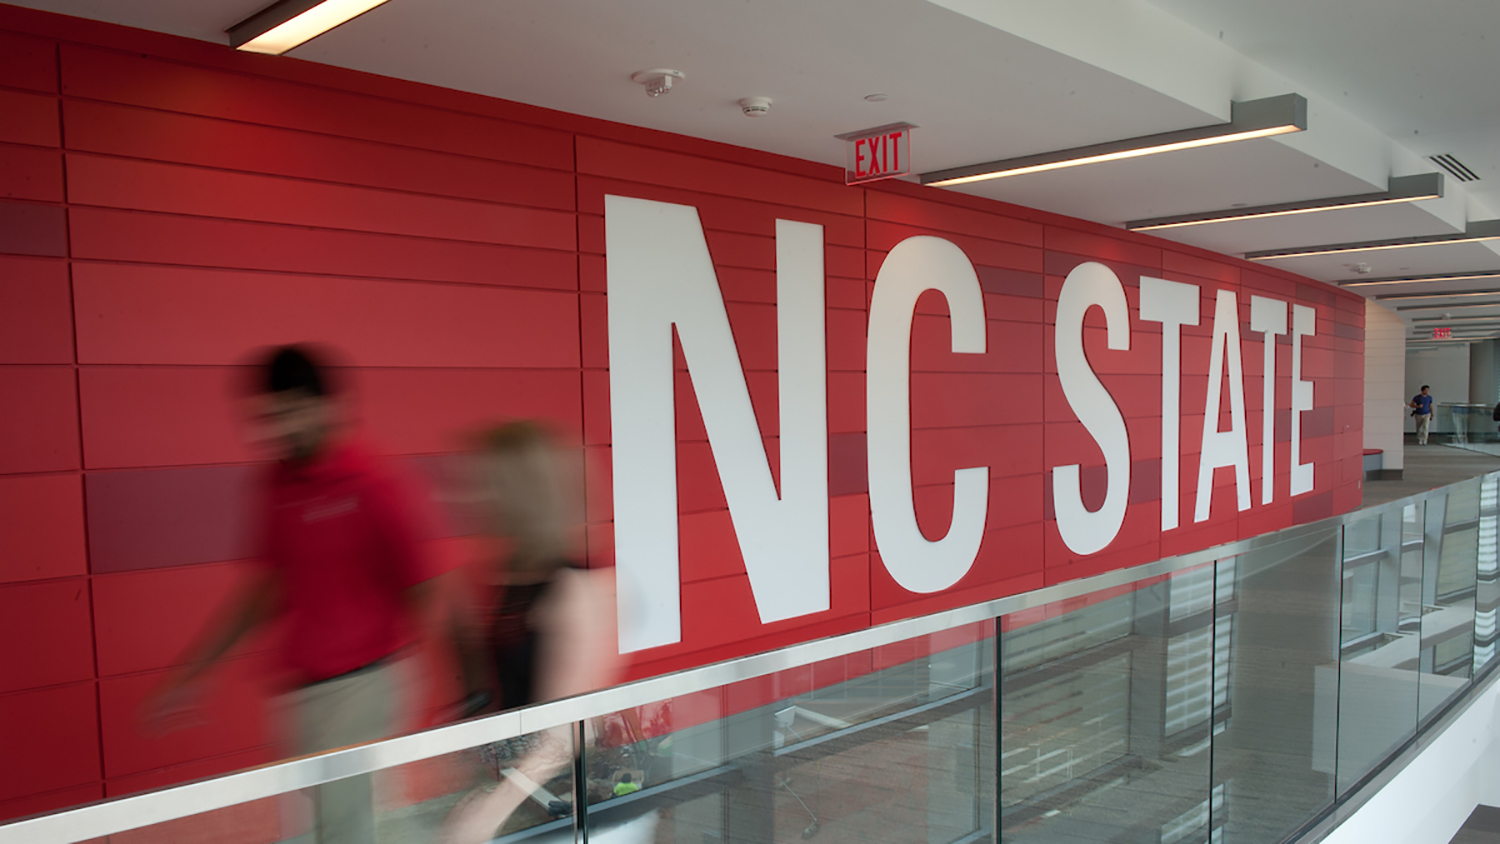 NC State sign in Talley Student Union